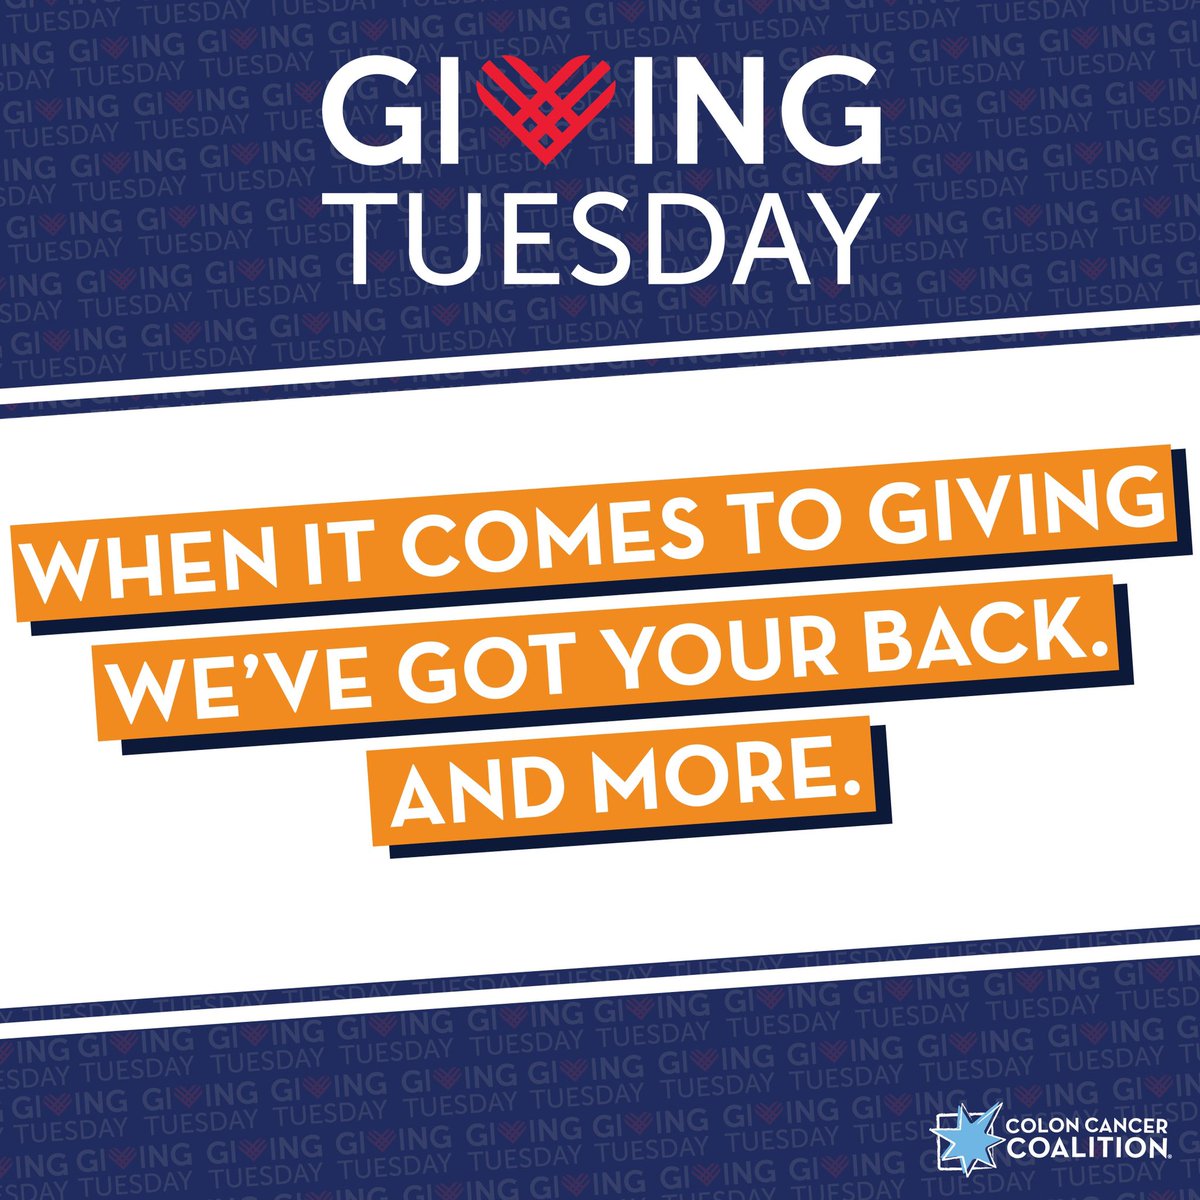 Pick me! #GivingTuesday is November 29. Consider a gift to @GYRIGPhilly that will stay in the #Philadelphia area to support awareness, education, outreach, research and care. Donate here: donate.coloncancercoalition.org/Philadelphia @ColonCancerCoal @TJUHospital @FoxChaseCancer @PennCancer